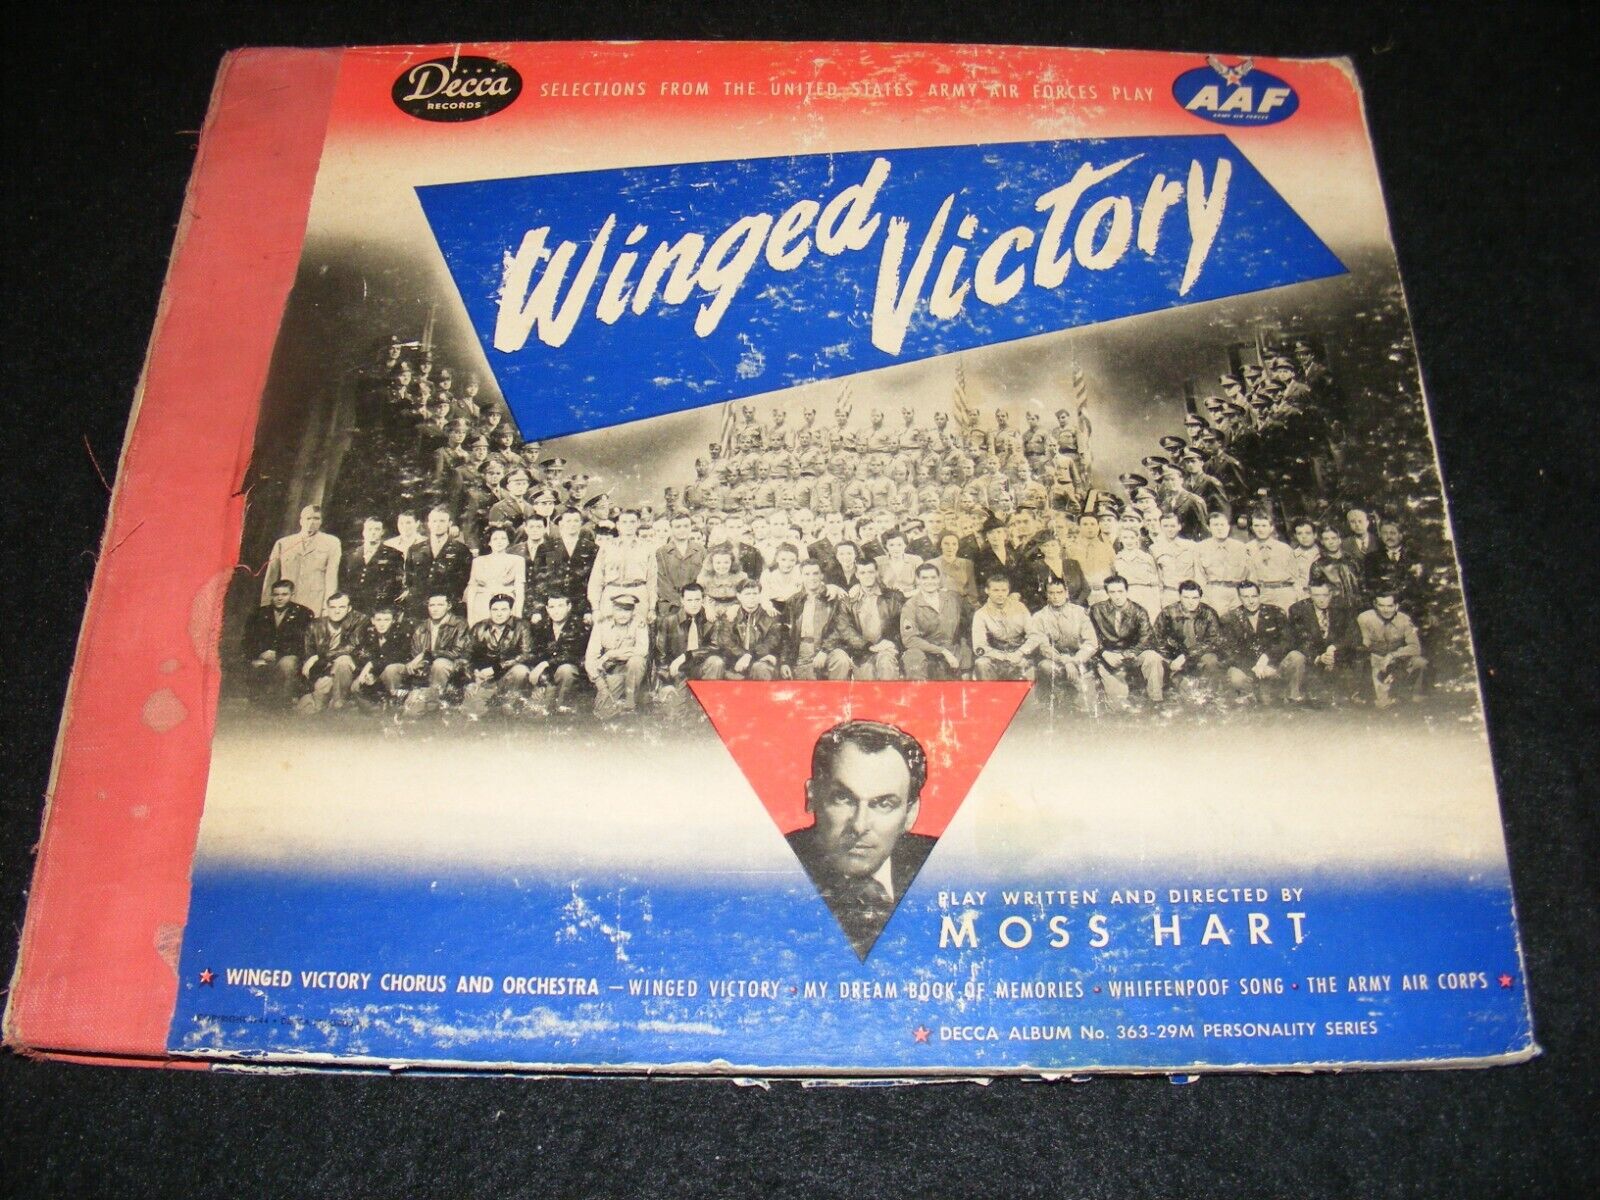 WINGED VICTORY 78 Set 12 inch Soundtrack MOSS HART Army Air Forces with Booklets